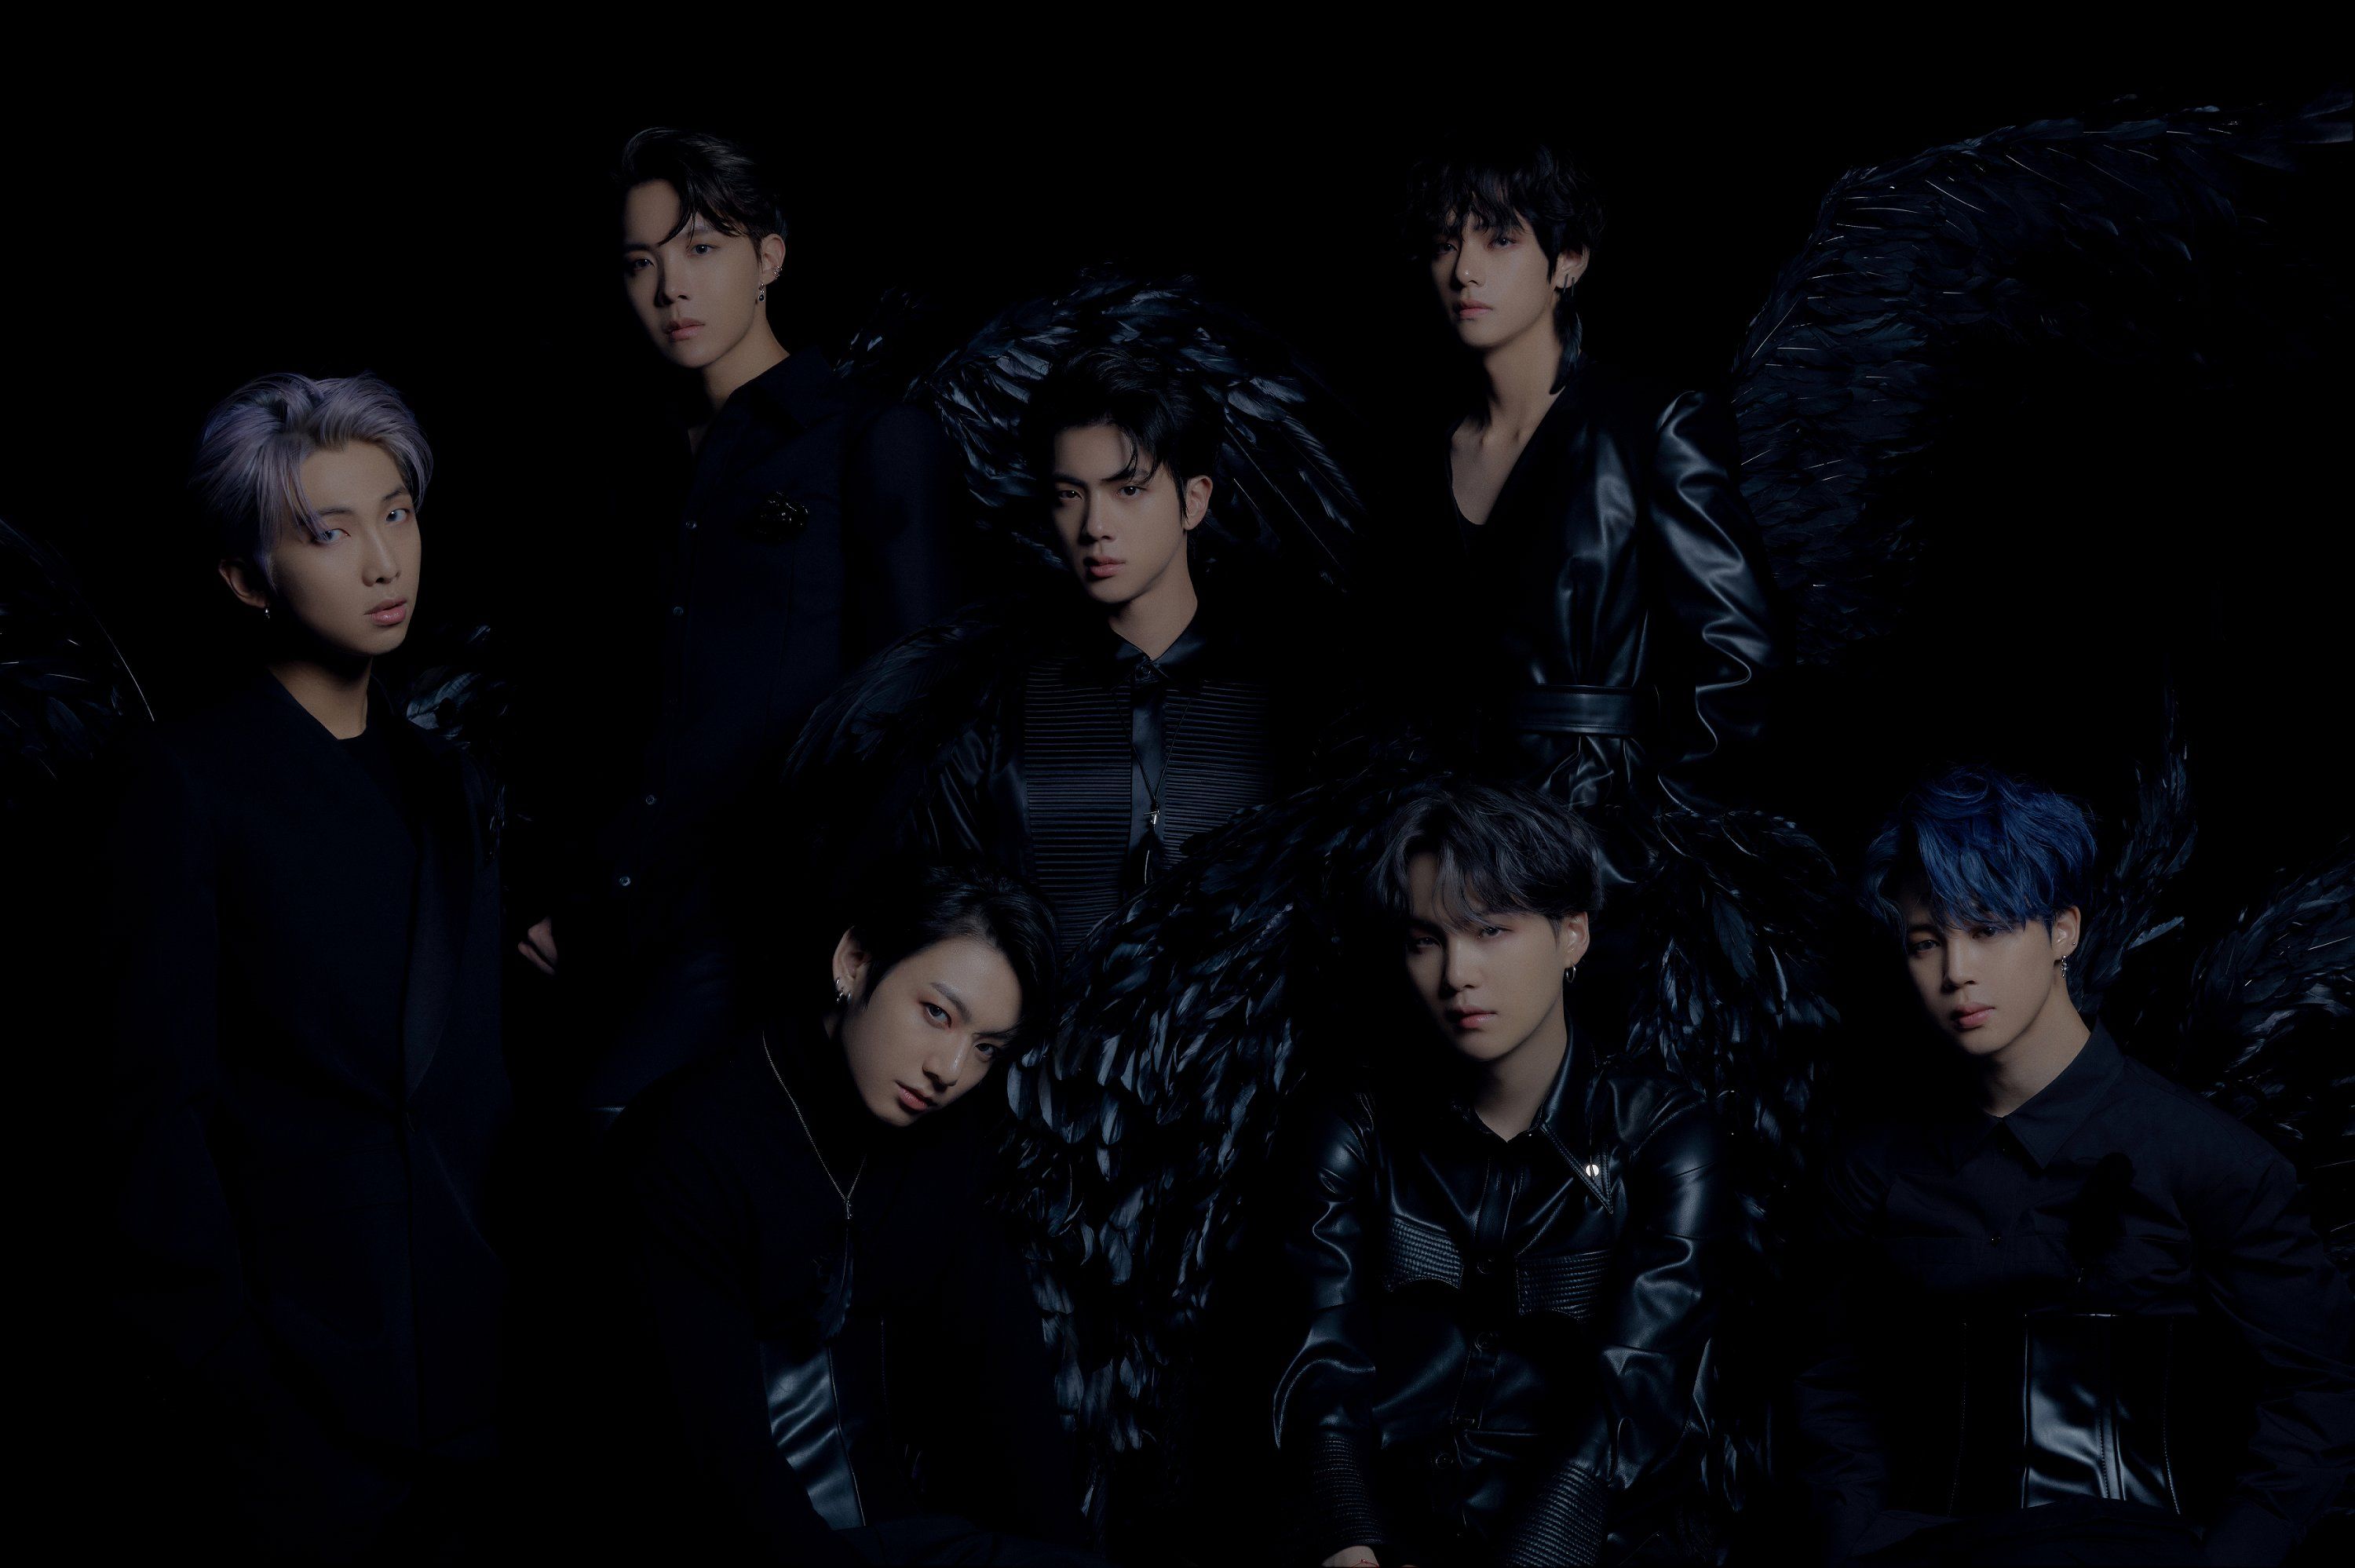 BTS Transforms Into Black Swans For “Map Of The Soul: 7” Concept Photo